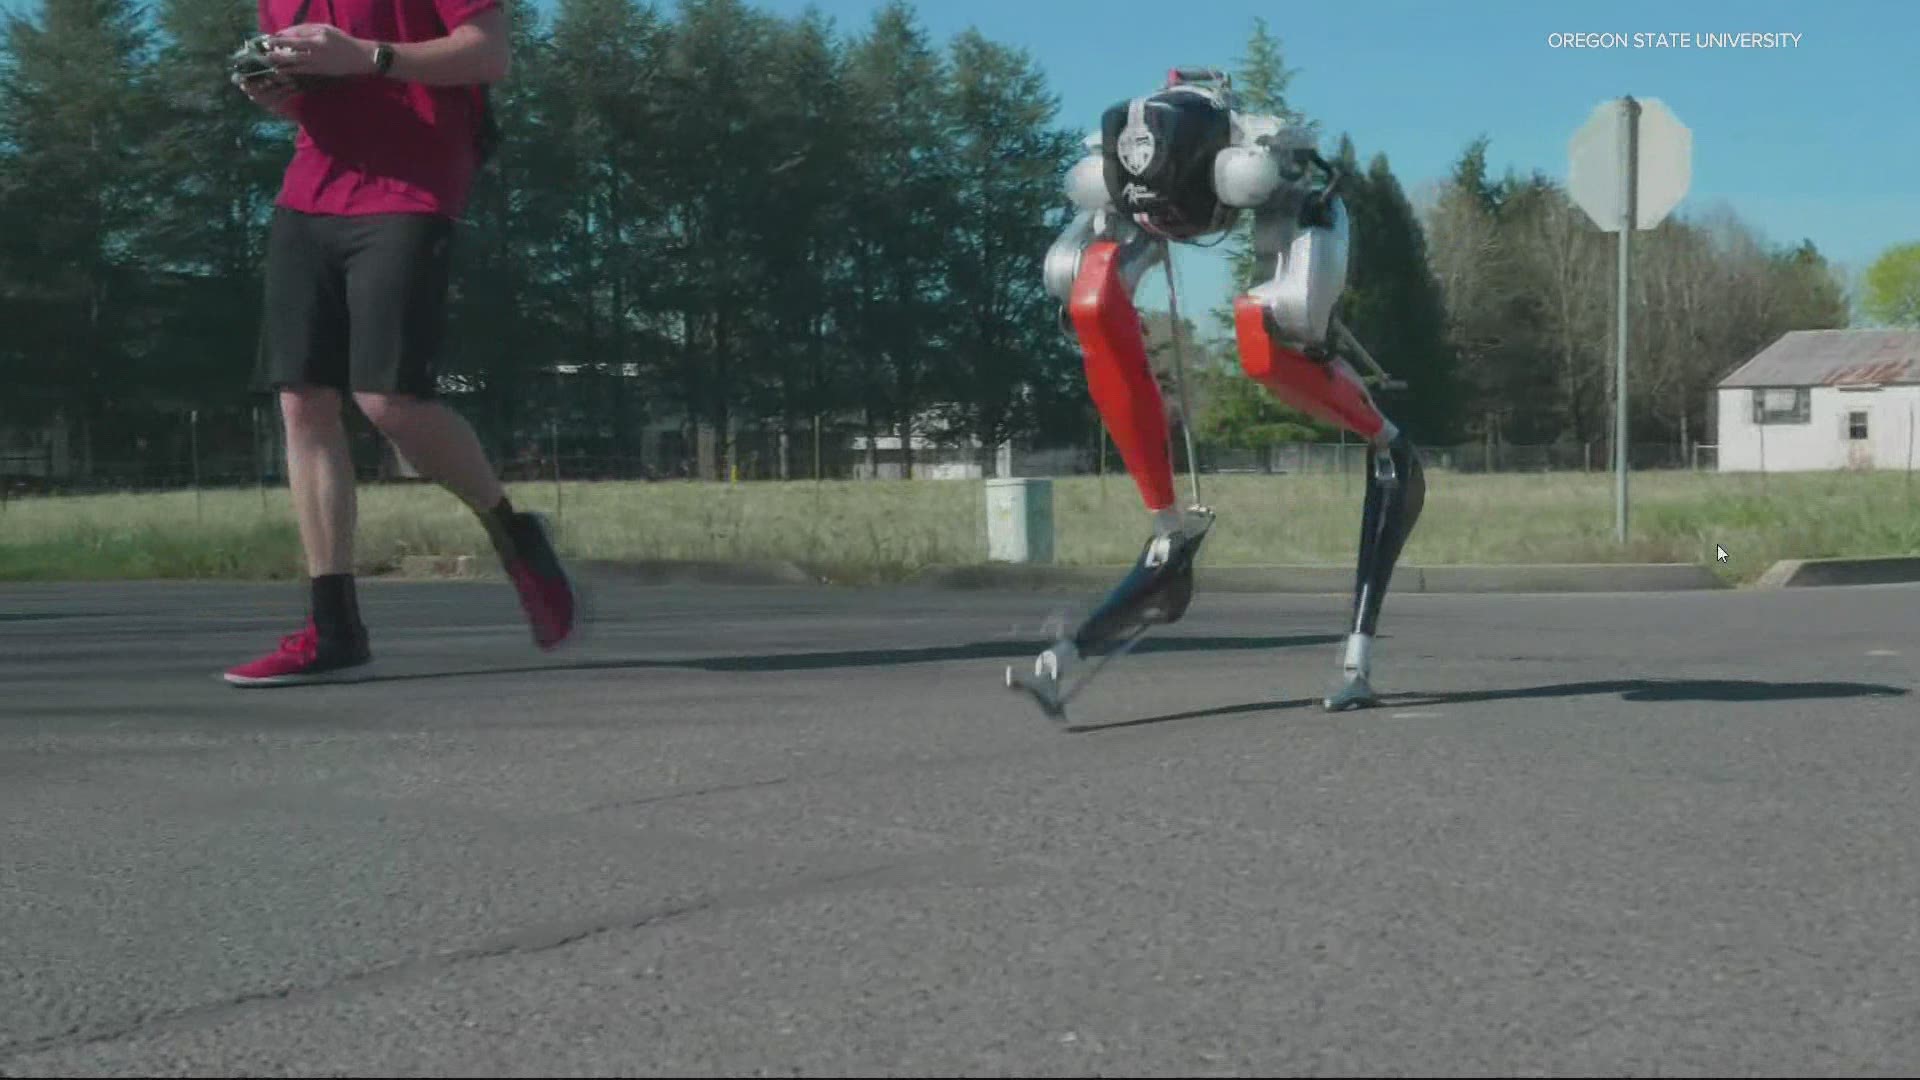 A robot built by a team at Oregon State University ran five kilometers around the OSU campus, a feat that’s never been done before.